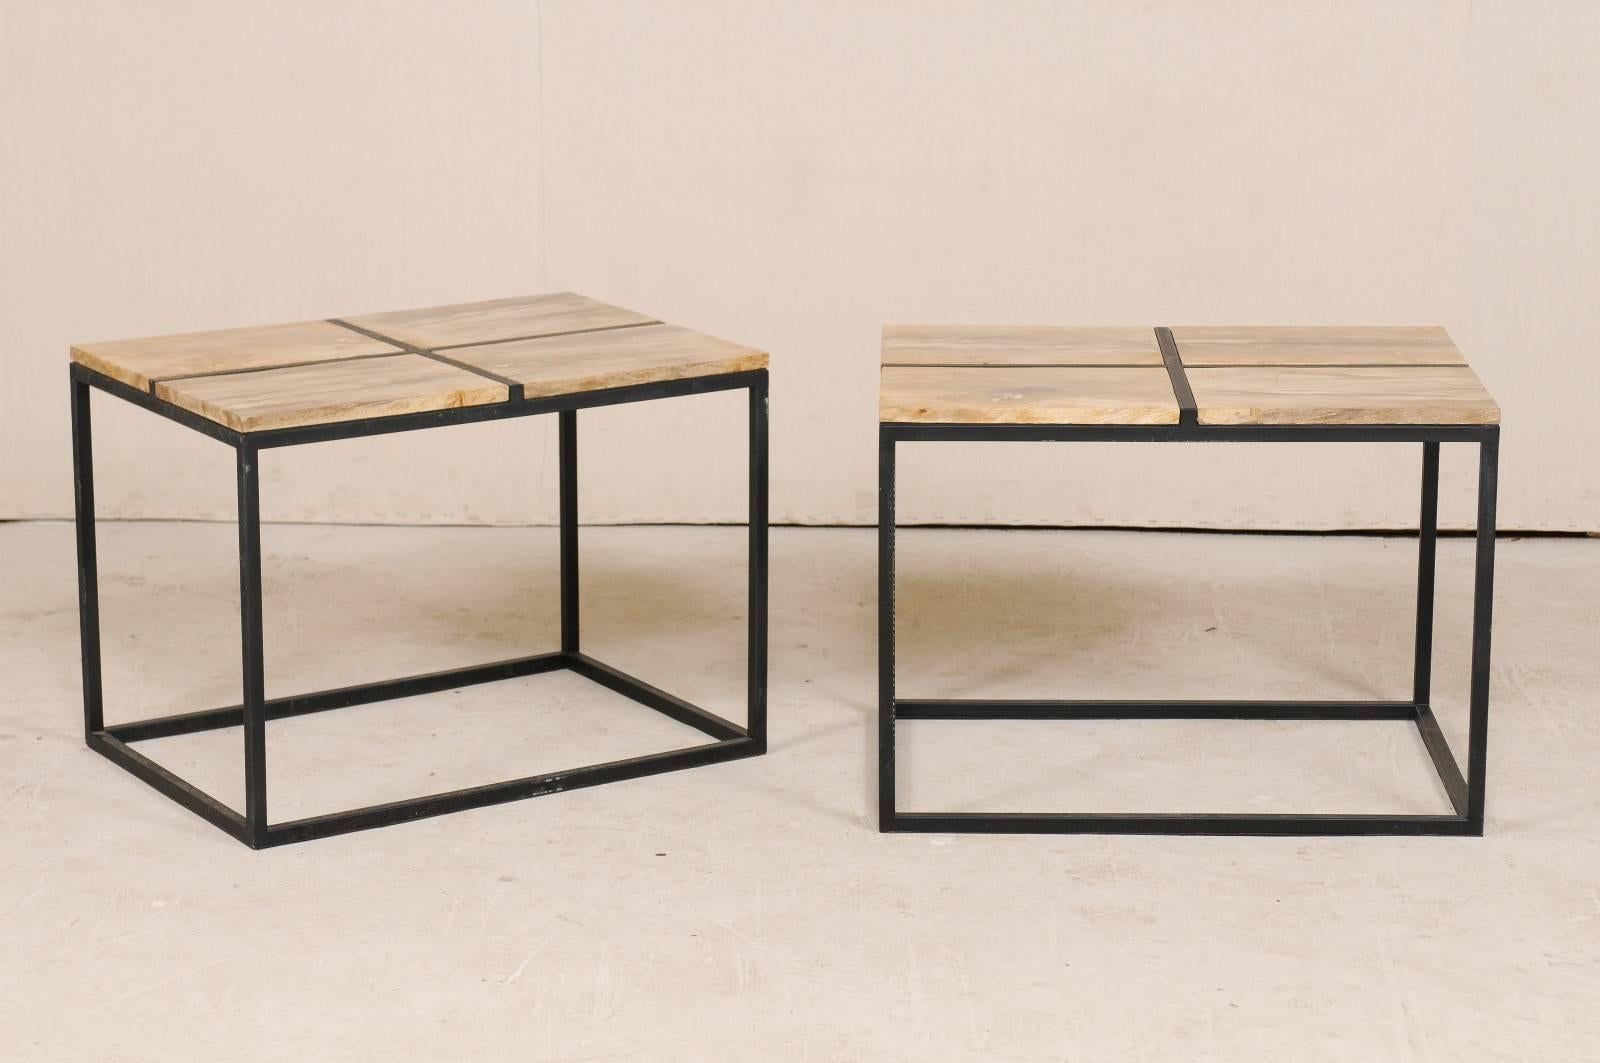 A pair of modern style custom petrified wood top coffee or side tables. This pair of coffee tables each feature four rectangular-cut petrified wood pieces set into a frame, making an overall rectangular-shaped top. The petrified top consists of